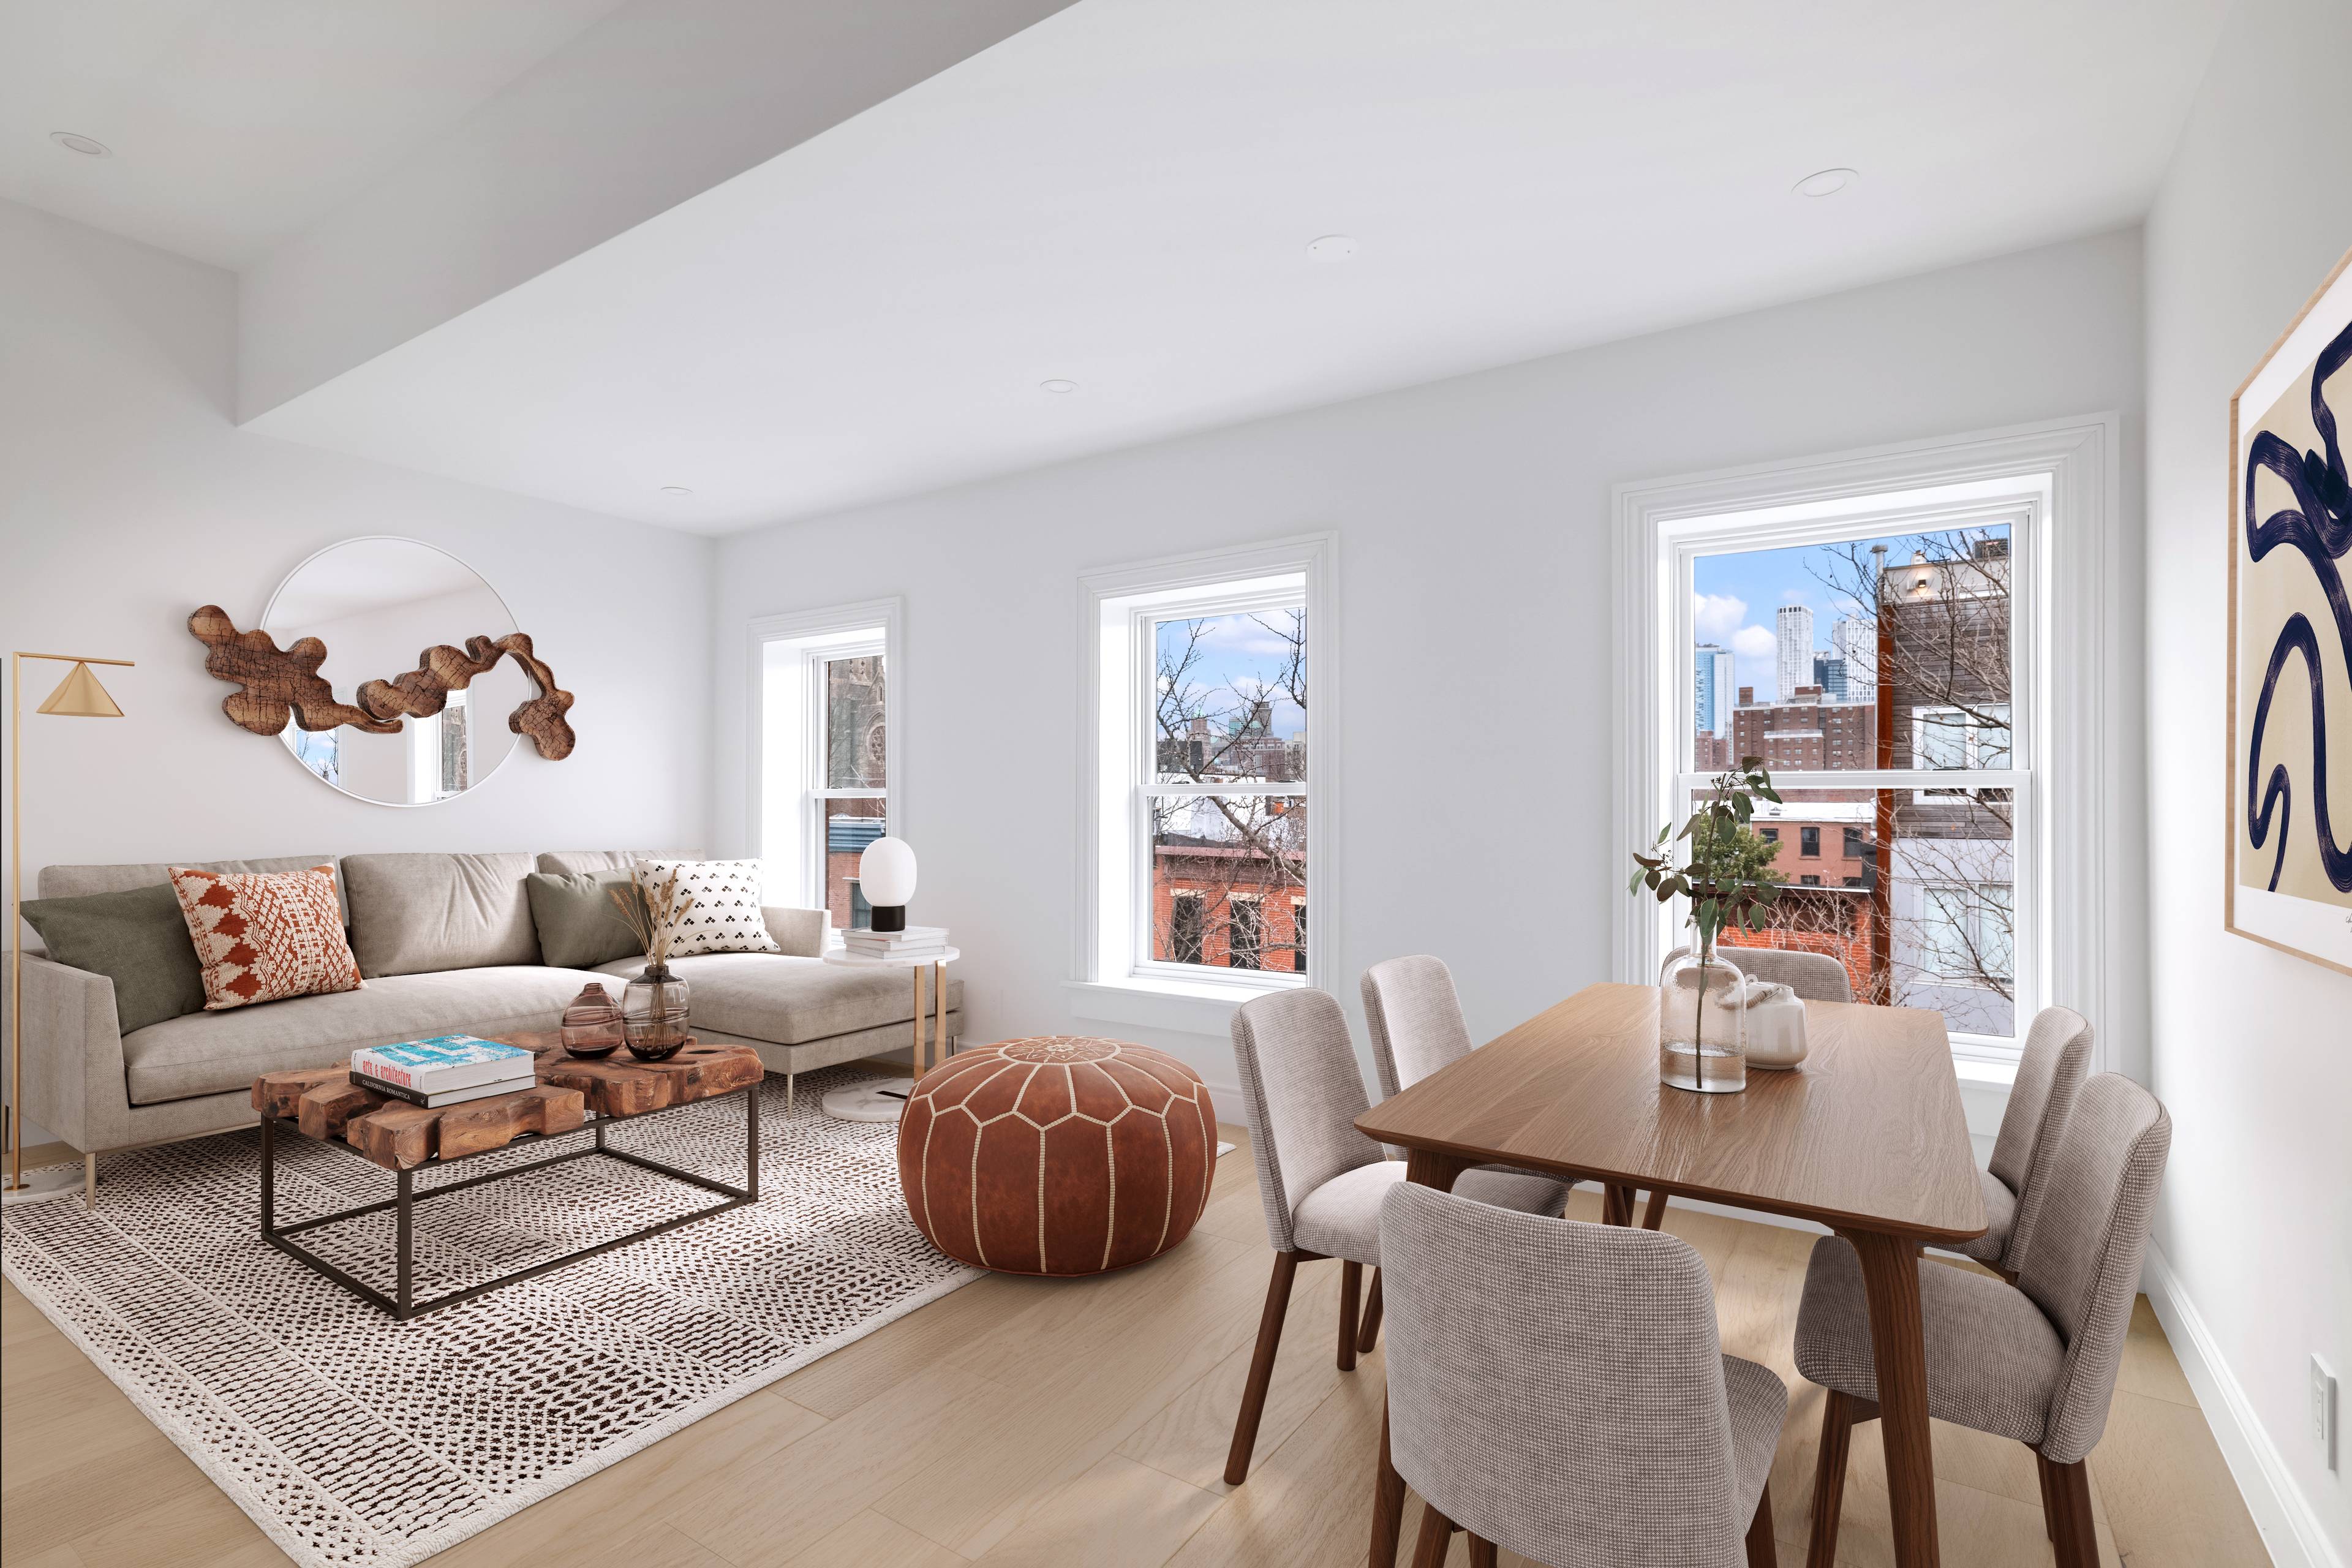 Welcome to Carroll Gardens boutique condominium at 434 Union Street where unparalleled quality and craftsmanship of these three luxury residences pairs with exceptional style and beautiful interiors.